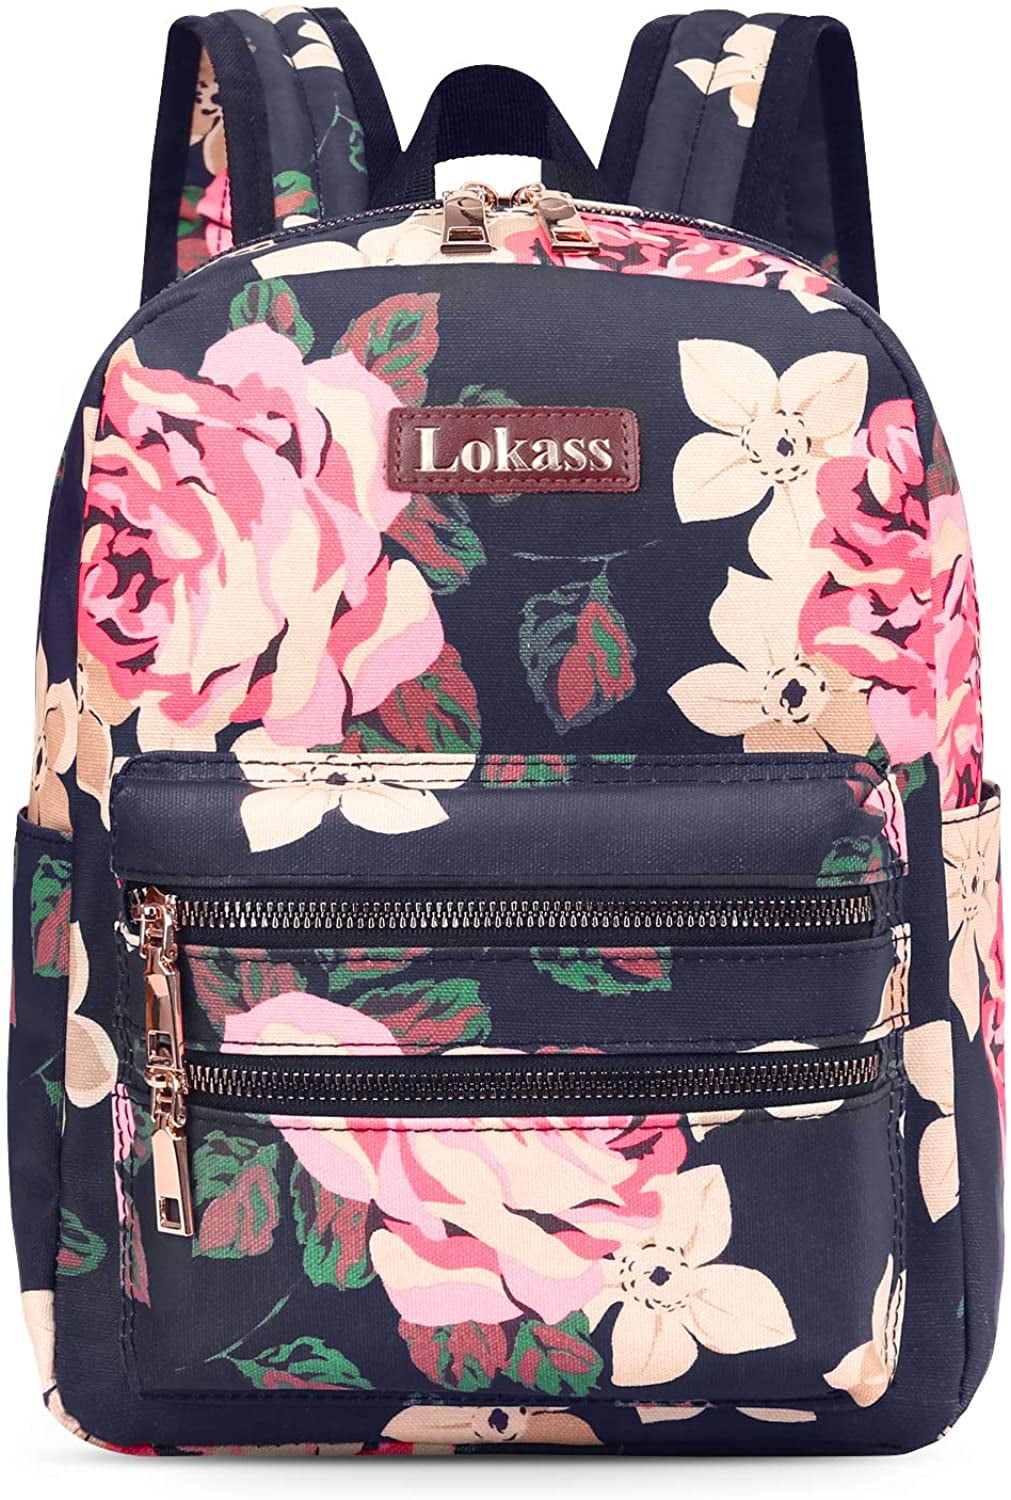 Laptop Backpack,15.6 Inch Stylish College School Backpack Tropical Animal Water Resistant Casual Daypack Rucksack Gym Bag for Women/Girls/Business/Travel 